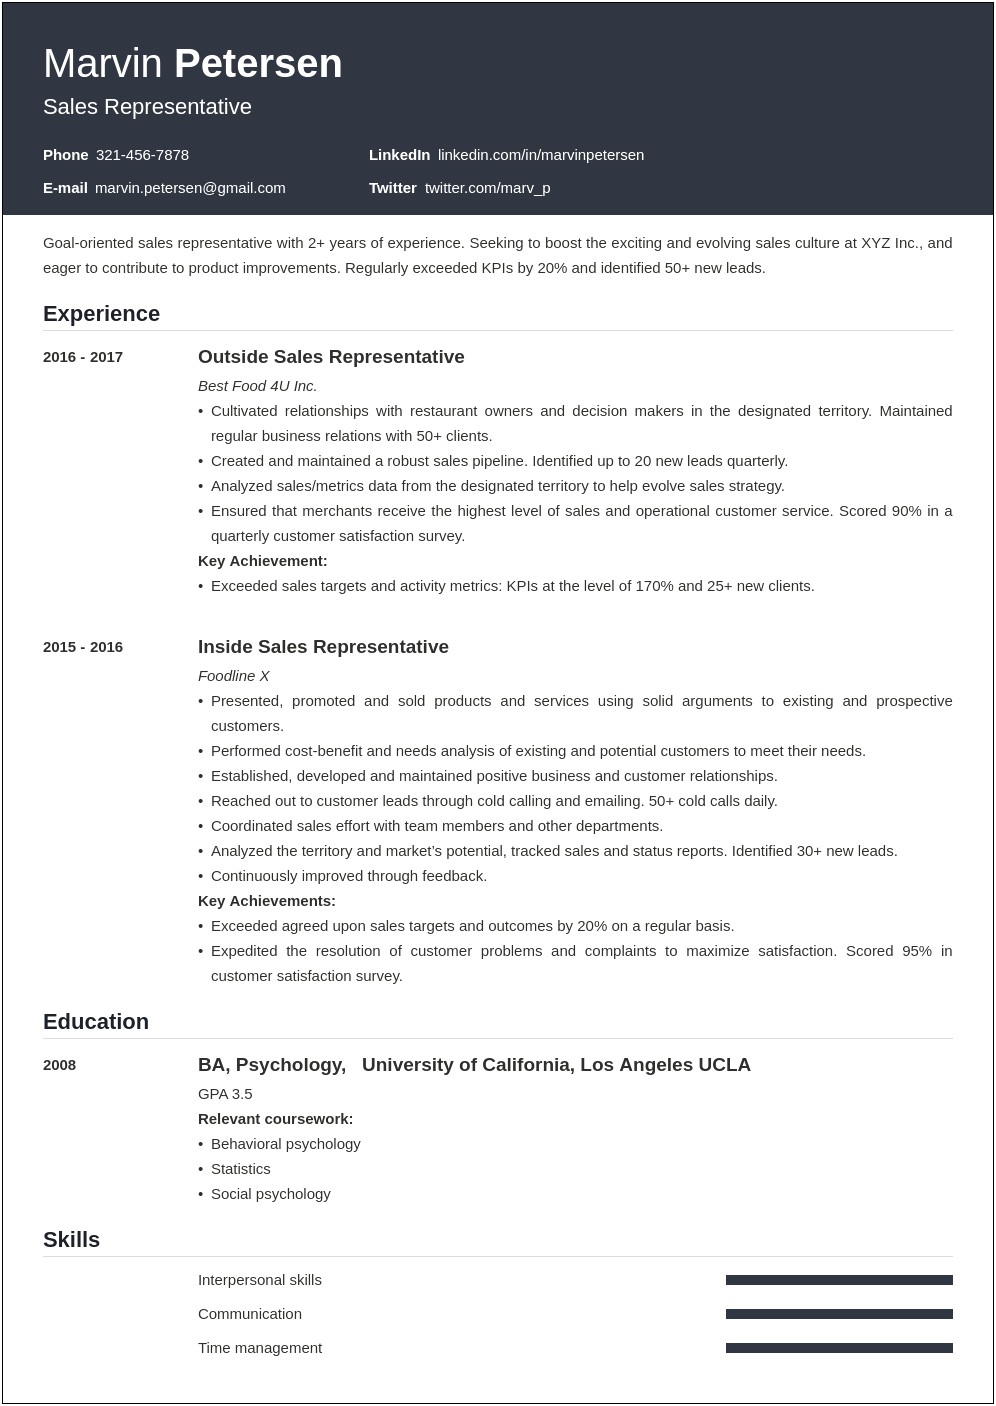 Sample Resume For Sales Position Objectives